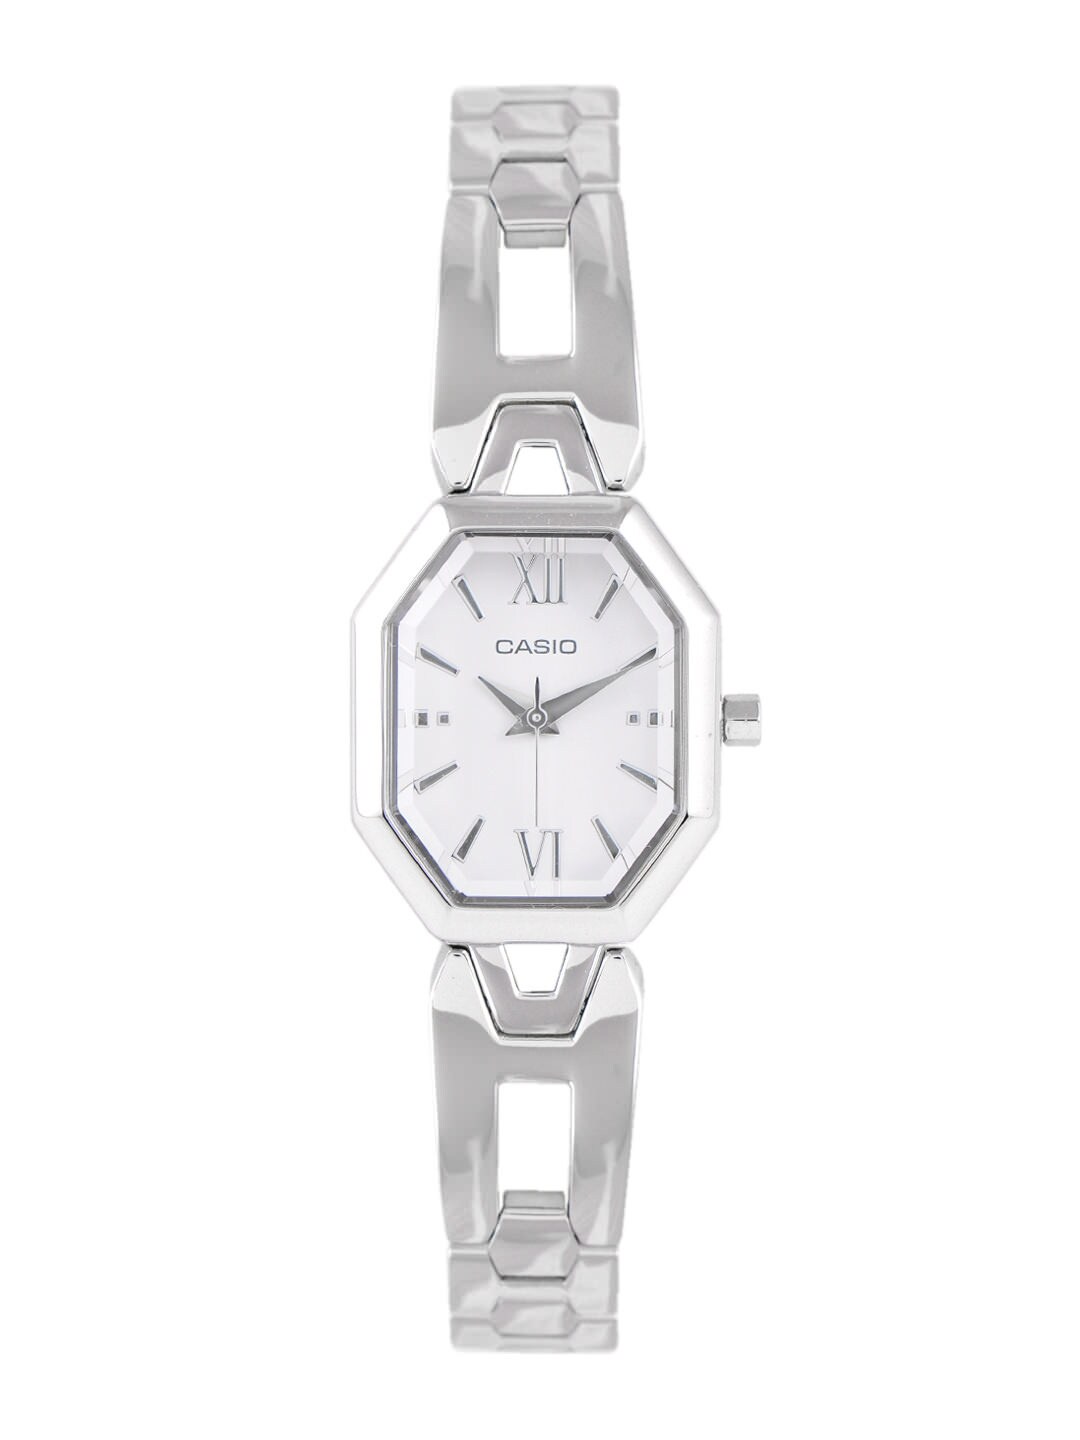 CASIO ENTICER Women White Dial Analogue Watch A640